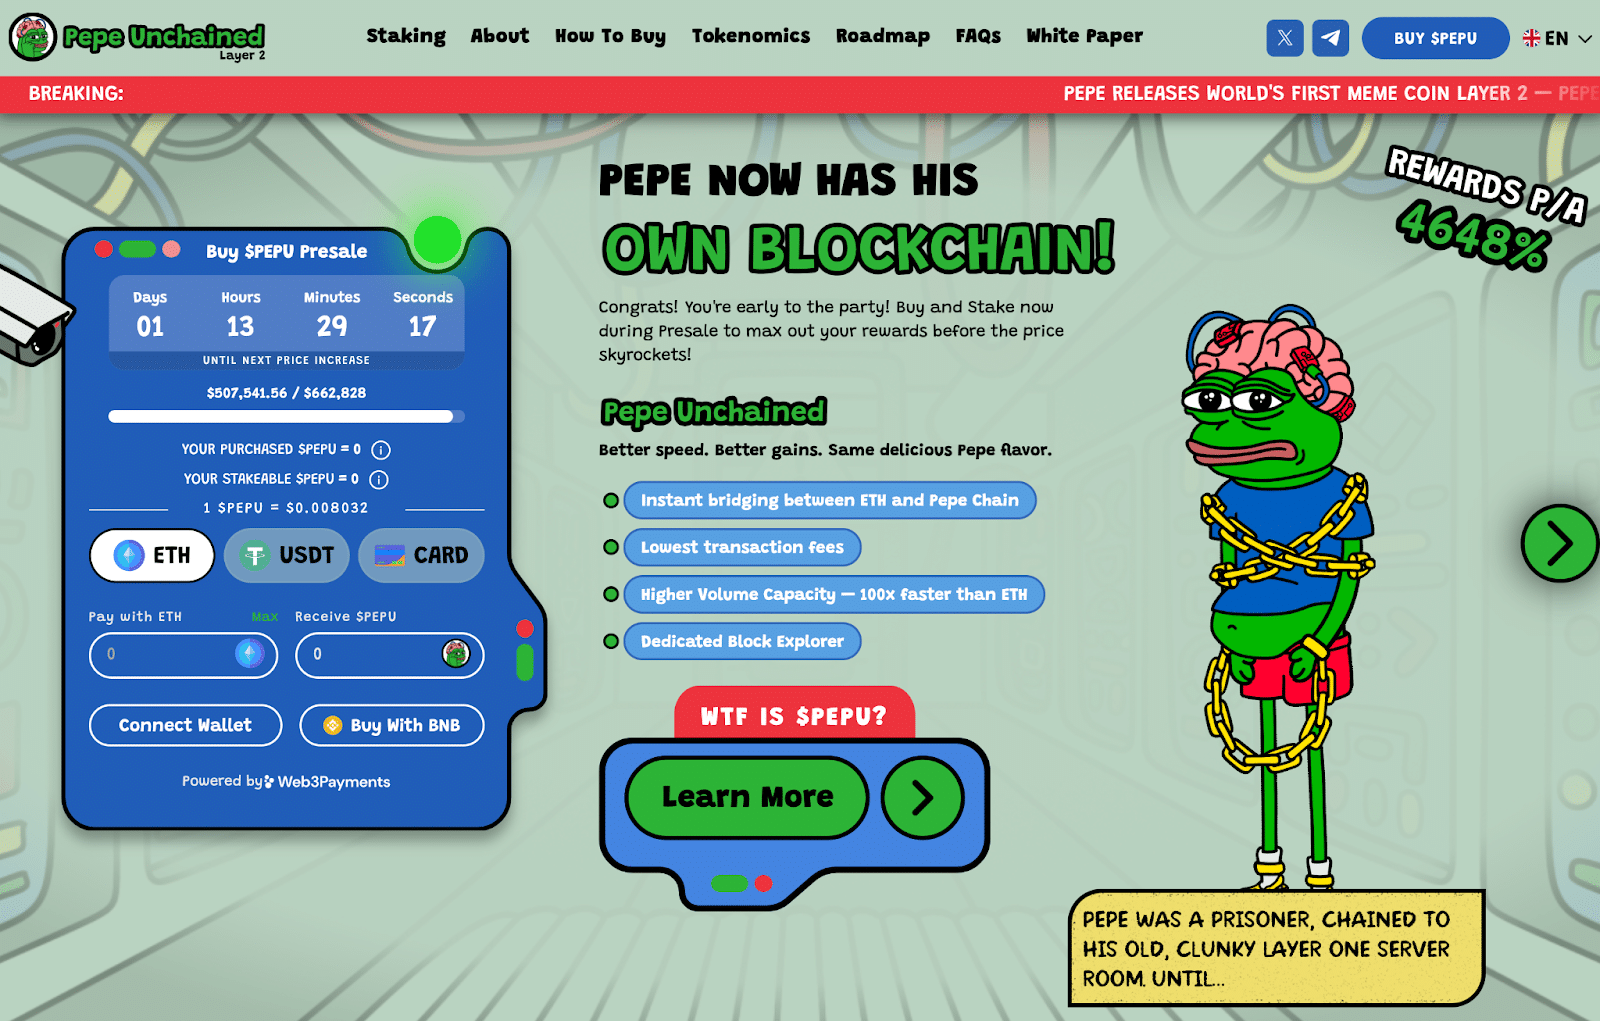 A faster, more powerful Pepe – Pepe Unchained ($PEPU) – has been unleashed and, in a flash, has just raised $511,000 in its ongoing presale.